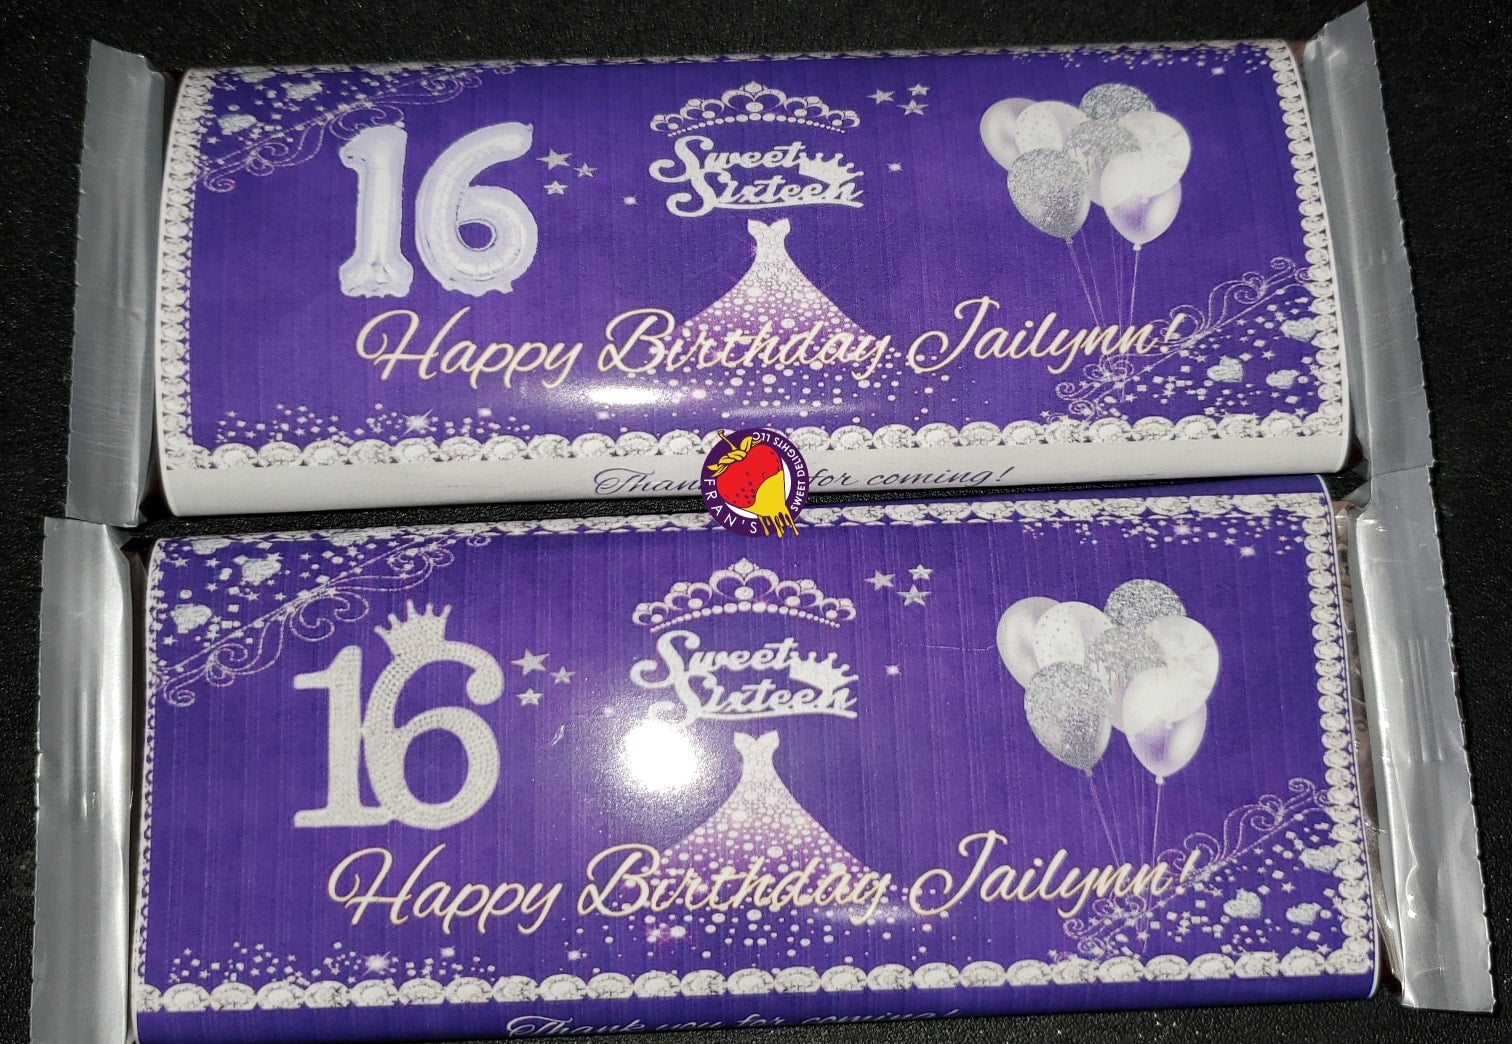 Editable Purple & SIlver Sweet 16 Chip Bag & Candy Bar Wrapper Set, Sweet Sixteen Party Favors